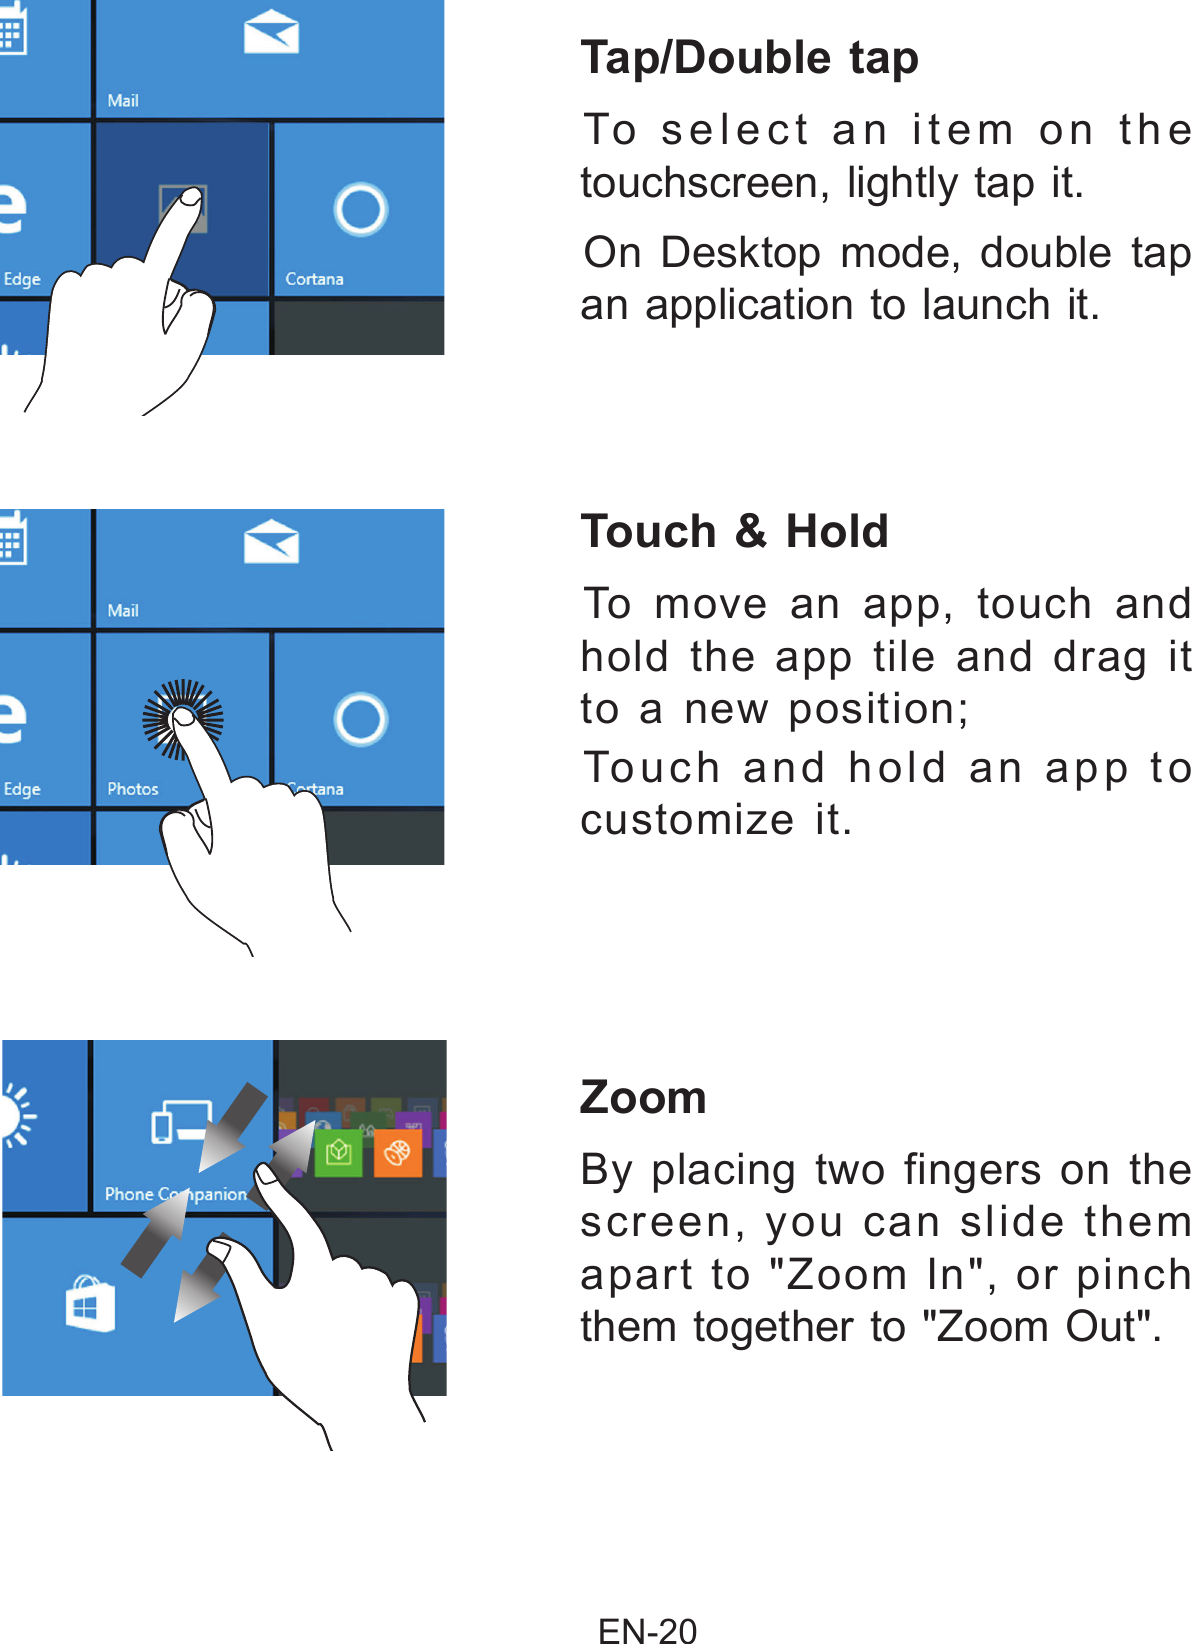                                                EN-20 Zoom  By placing two fingers on the screen, you can slide them apart to &quot;Zoom In&quot;, or pinch them together to &quot;Zoom Out&quot;. Tap/Double tap  To select an item on the touchscreen, lightly tap it.On Desktop mode, double tap an application to launch it.Touch &amp; Hold To move an app, touch and hold the app tile and drag it to a new position; Touch and hold an app to customize it.